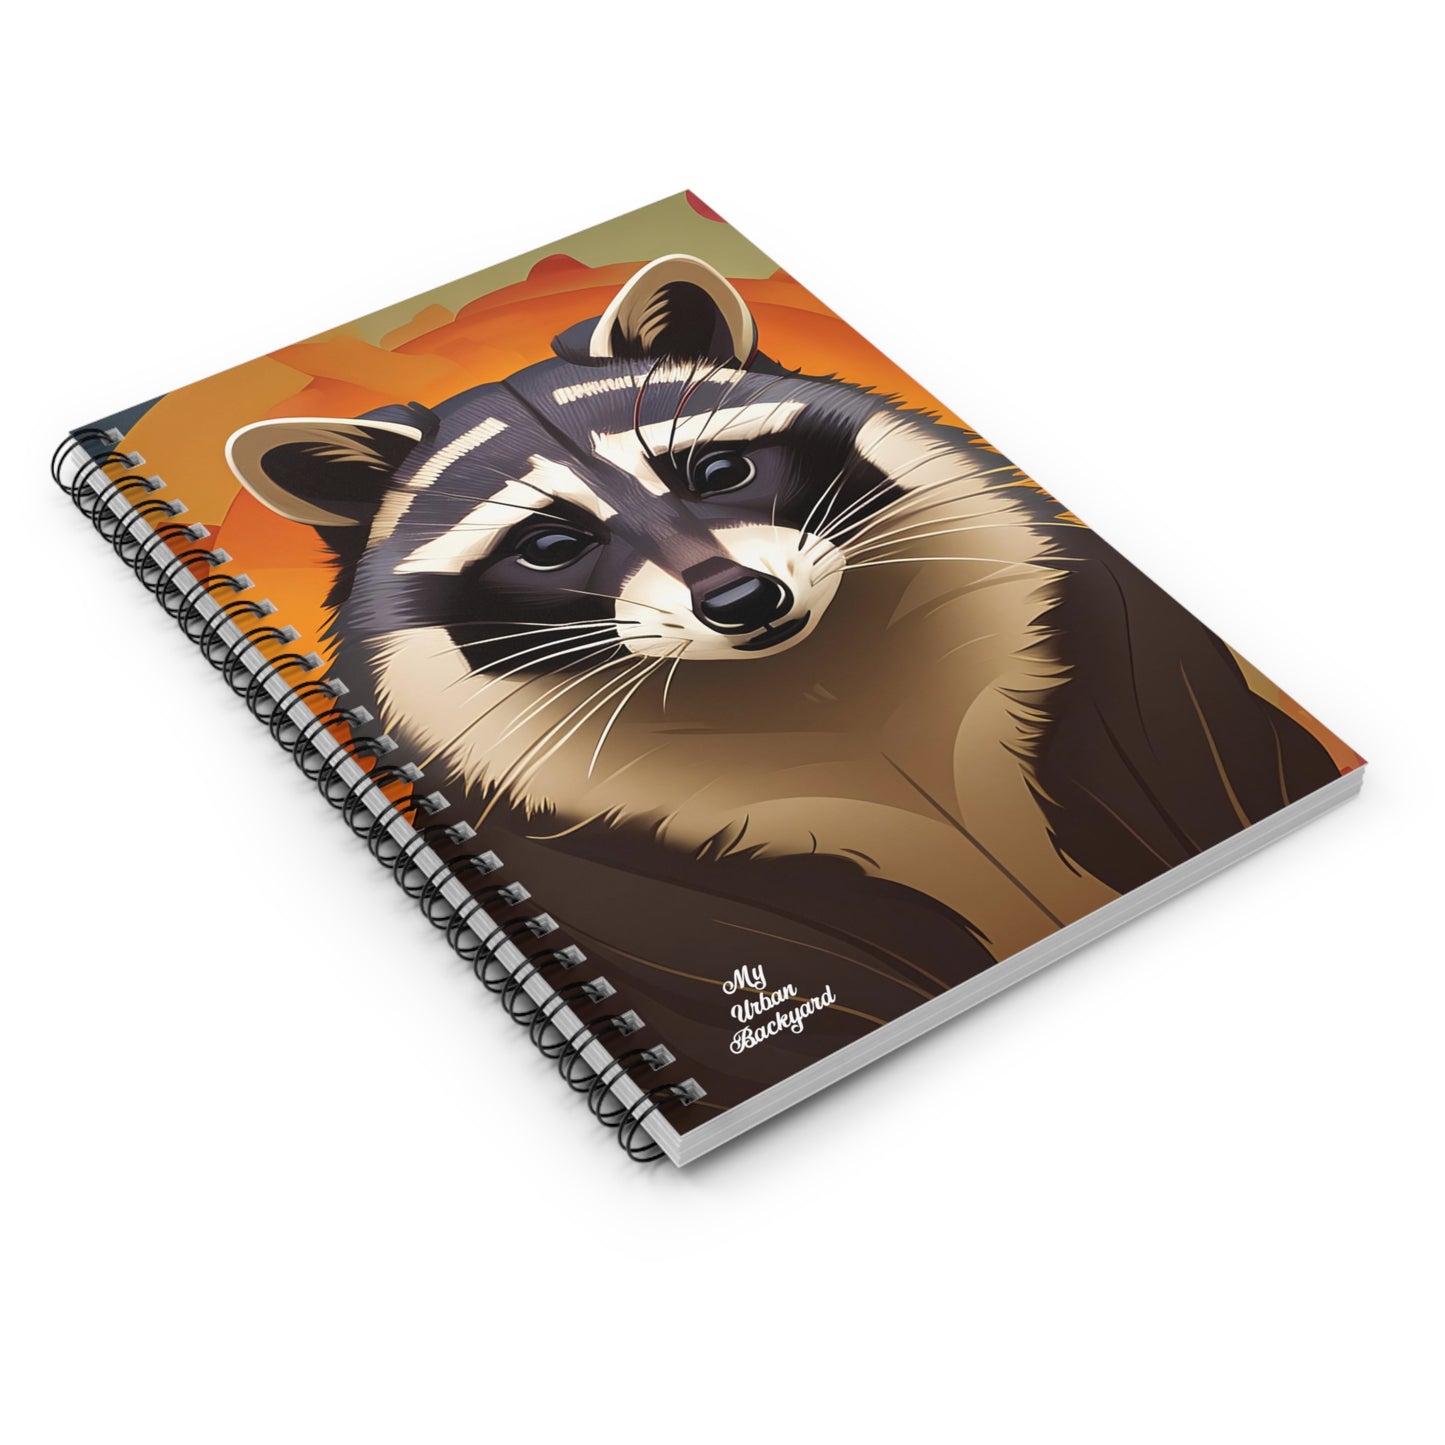 Raccoon at Sunset, Spiral Notebook Journal - Write in Style